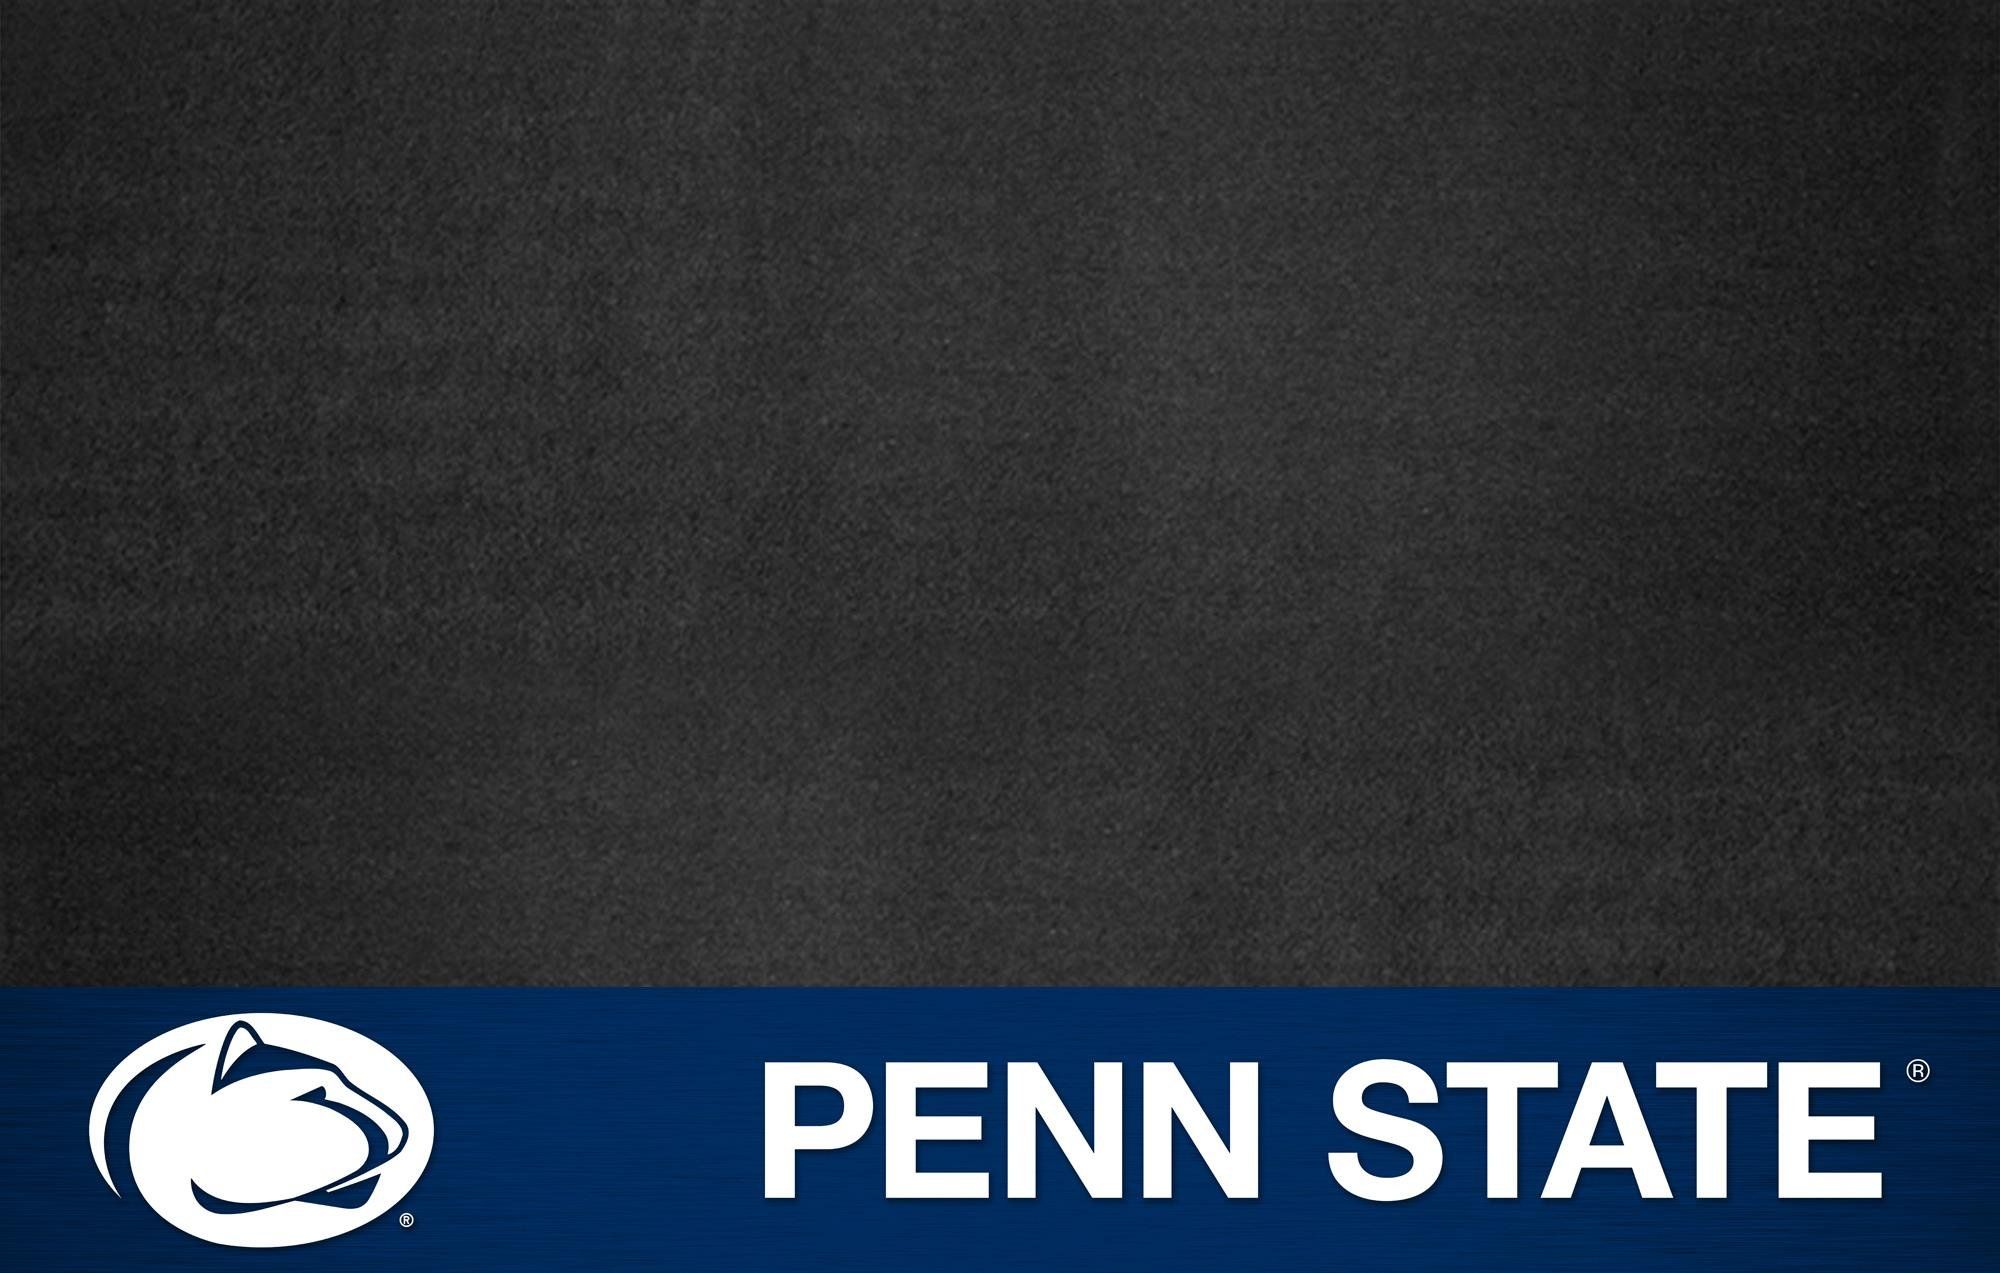 PENN STATE NITTANY LIONS college football wallpaper | 2000x1273 ...